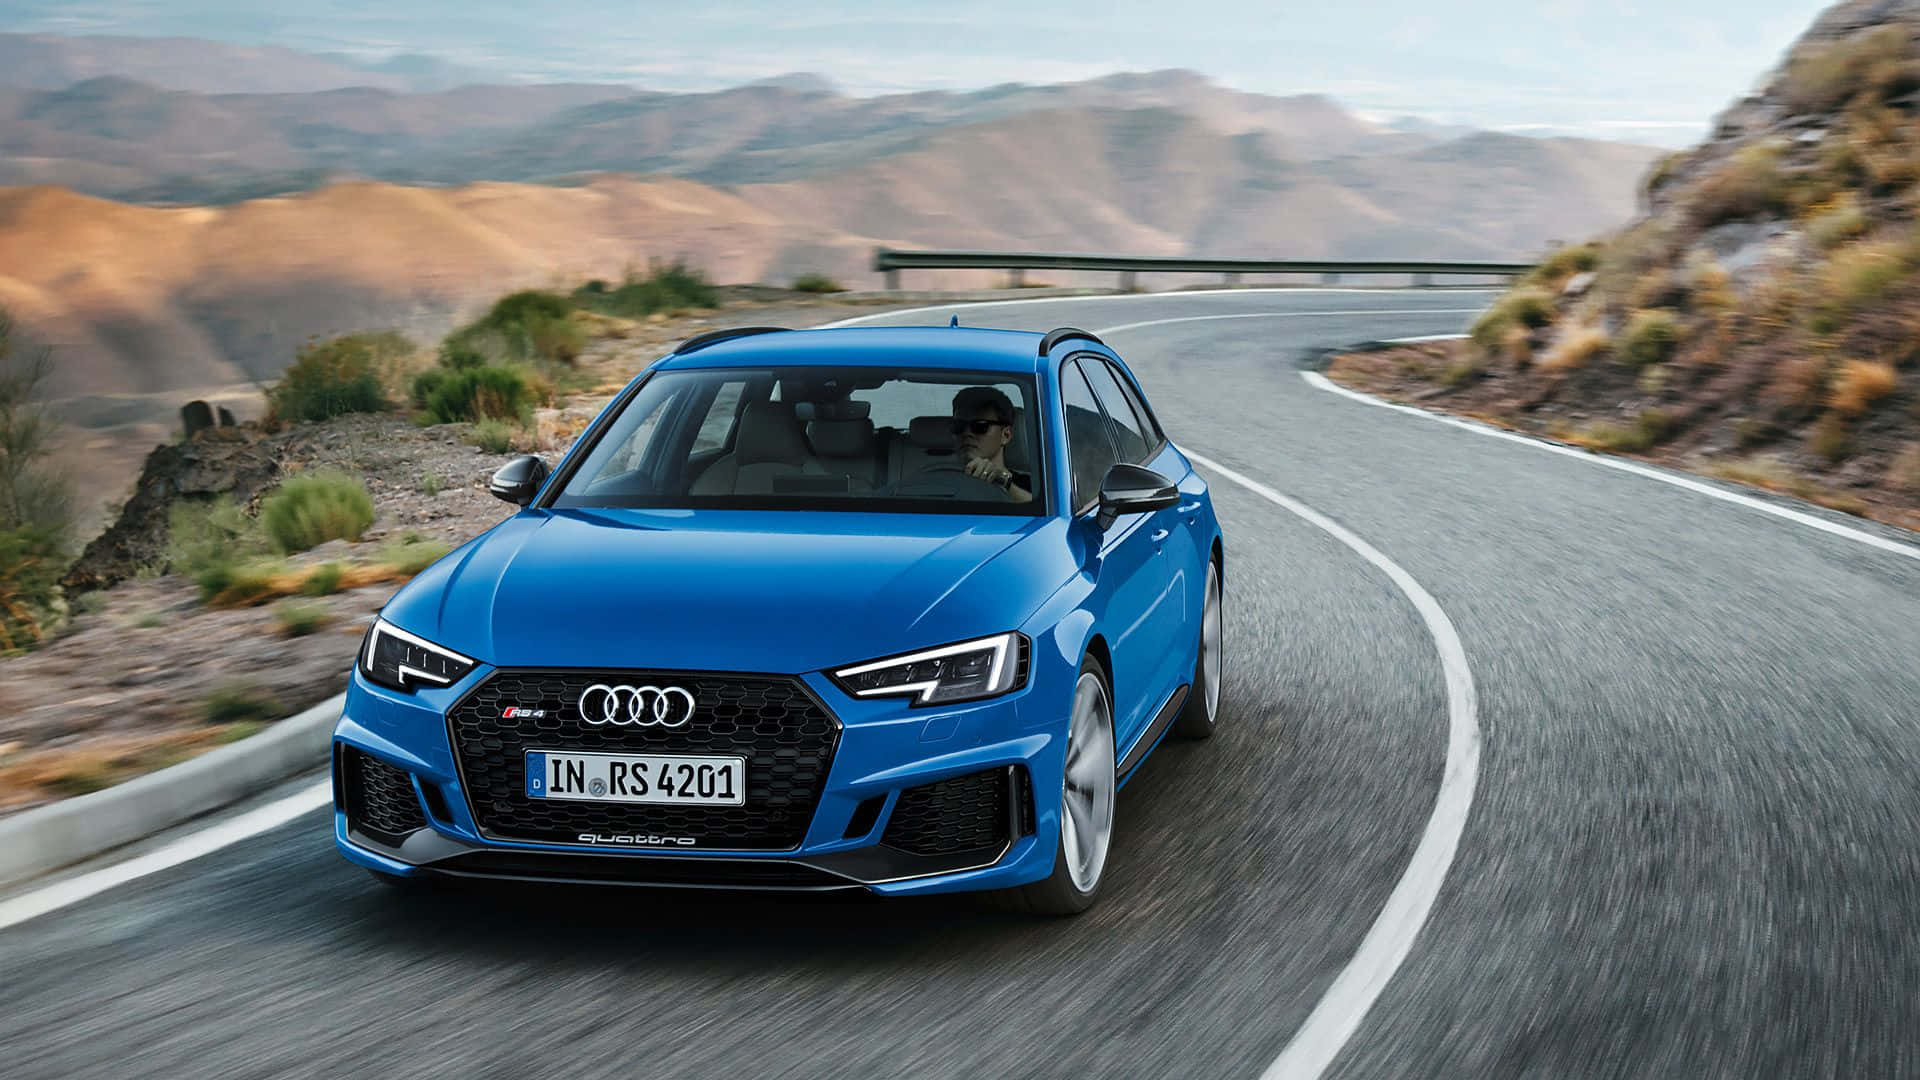 Eye-catching Audi RS5 in action Wallpaper